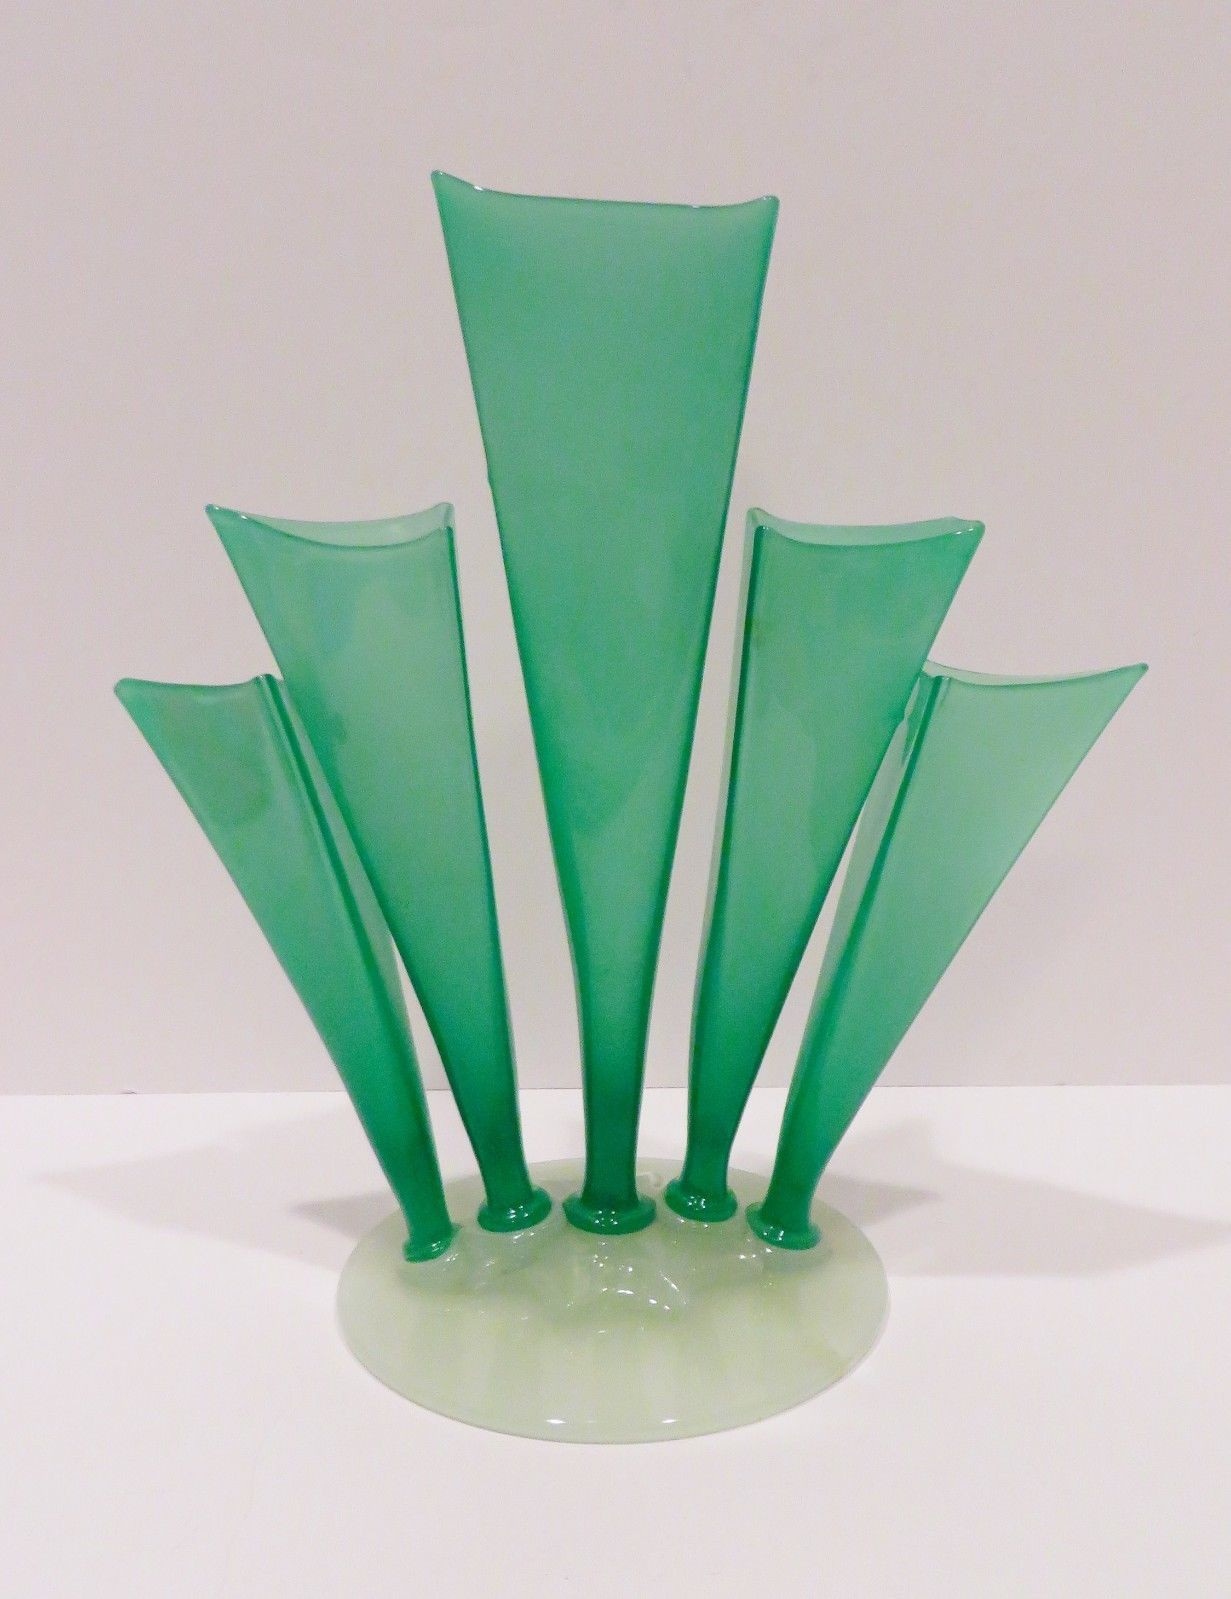 16 Recommended Galaxy Art Glass Vase 2024 free download galaxy art glass vase of frederick carder stueben green jade prong vase art glass in frederick carder stueben green jade prong vase